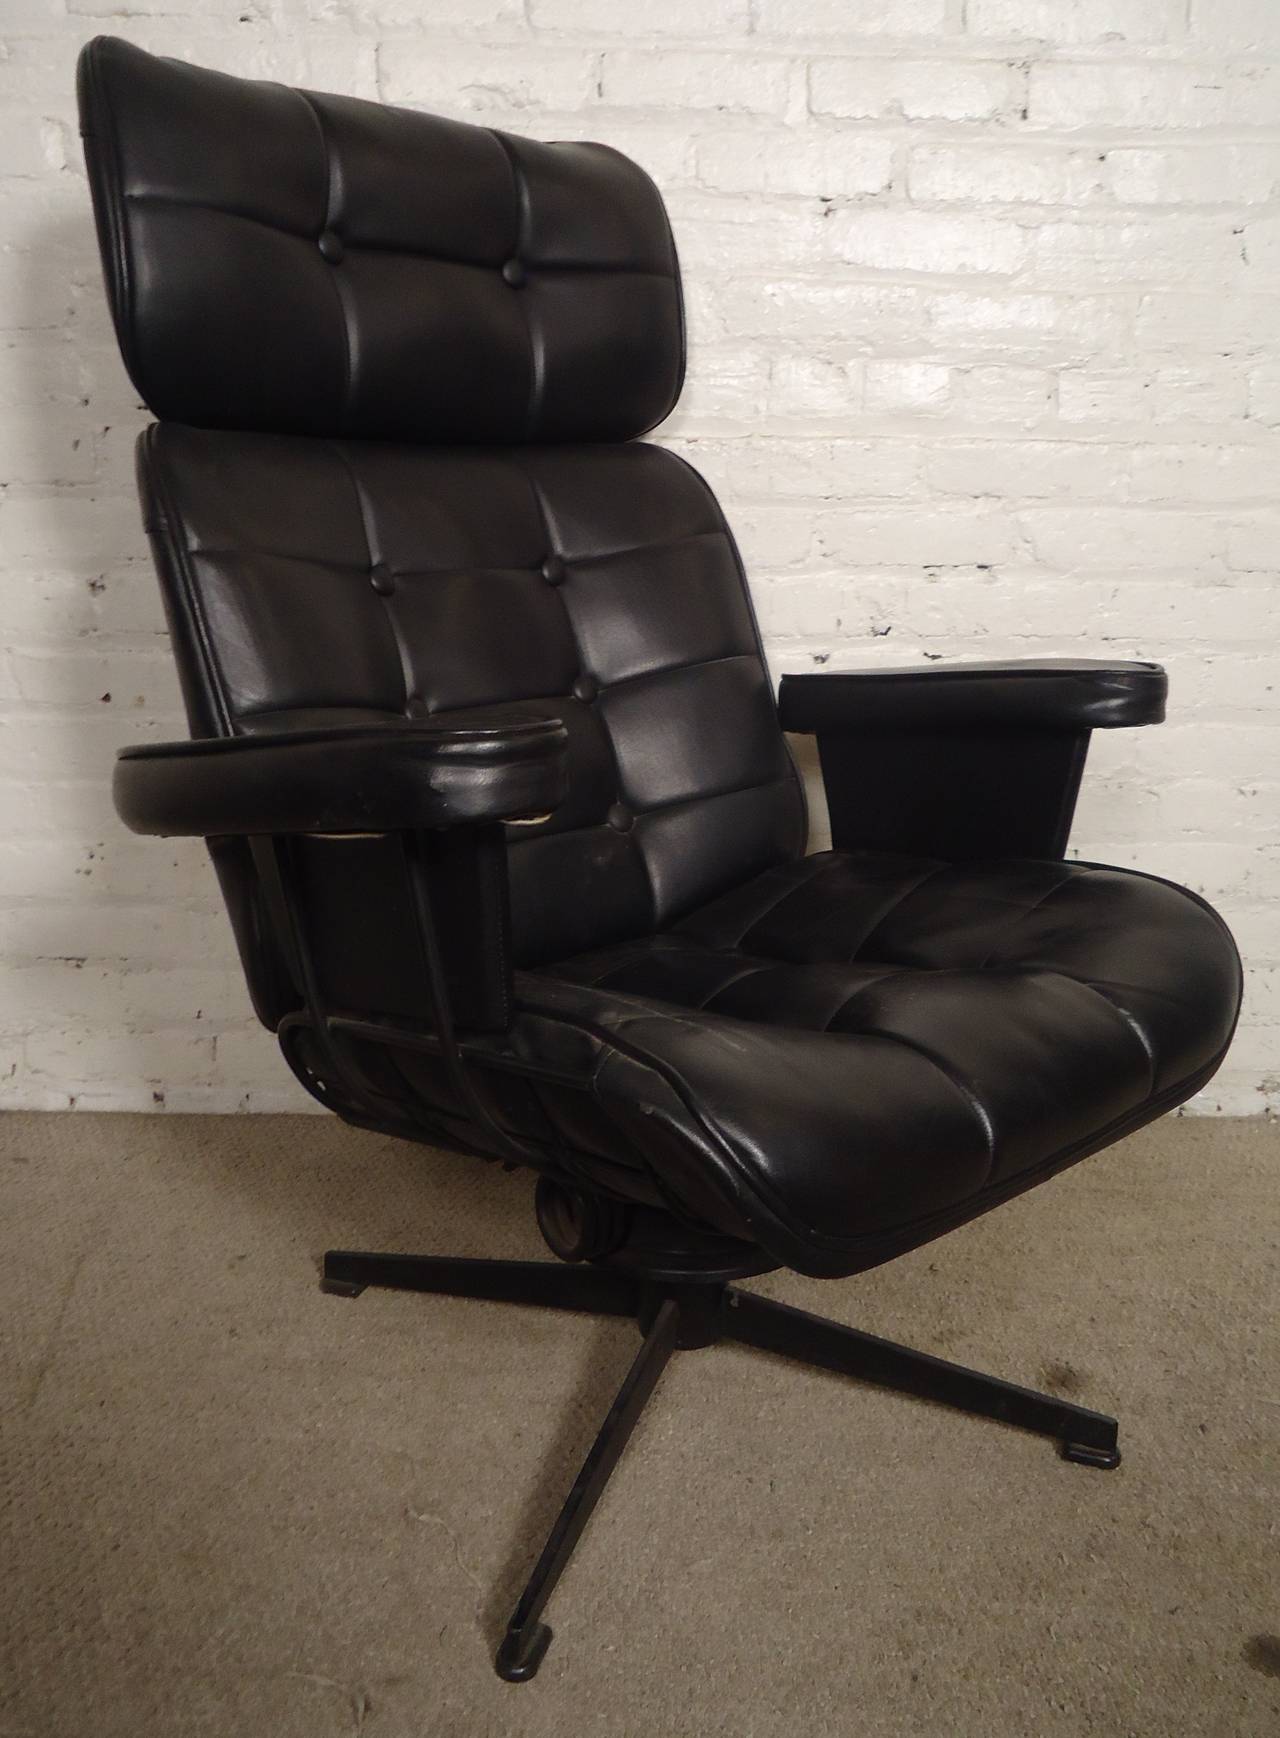 Vintage swivel chair with matching ottoman by The Homecrest Co.
Sleek comfortable design with high back and tufted upholstery. A great rendition of the classic Eames lounge chair.

Ottoman: 24"w 21"d 16"h

(Please confirm item